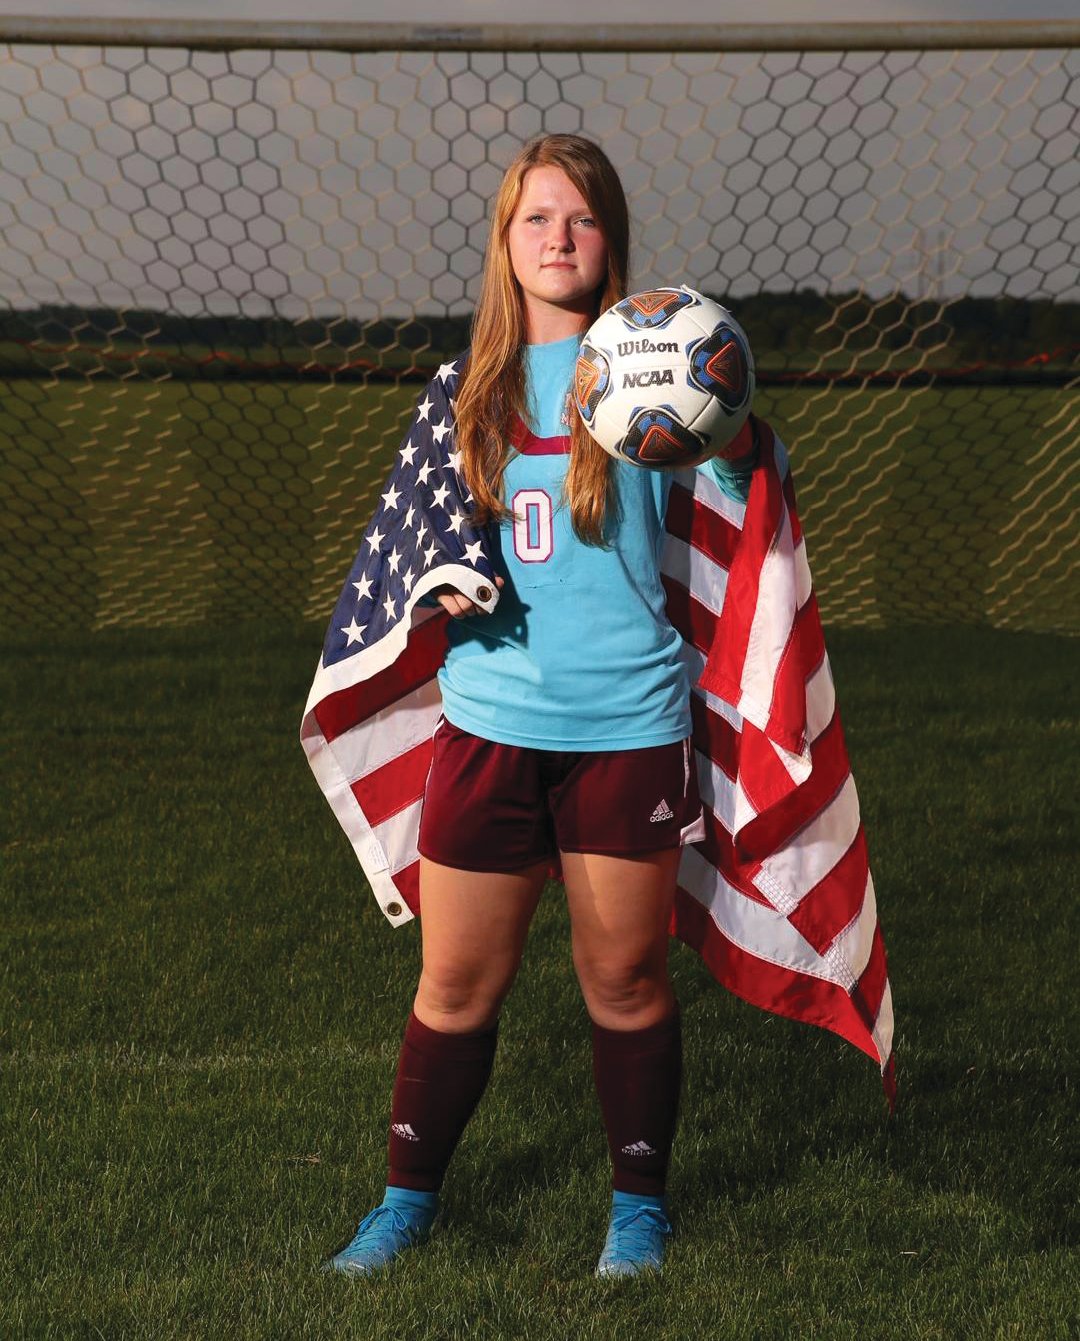 North Montgomery goalkeeper Sydnee Turner enlisted in the National Guard last fall and went to boot camp this summer before returning for her senior year.